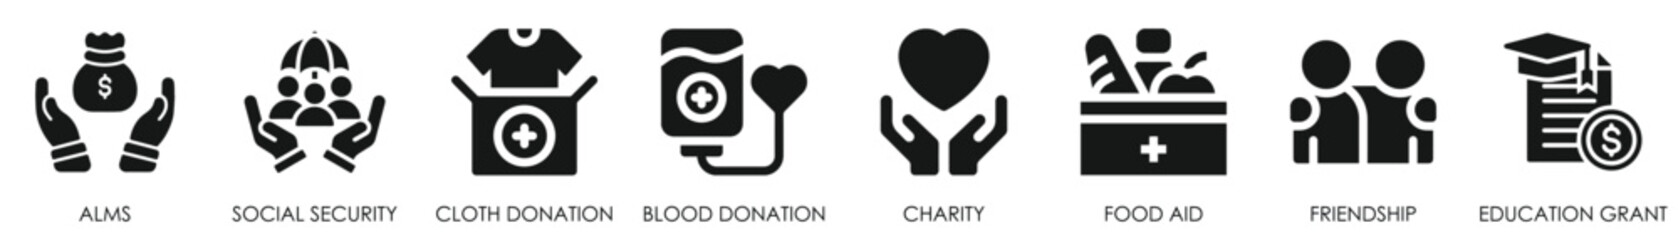 Charity icons set. Collection of hands, donations, hearts, unity and so on.